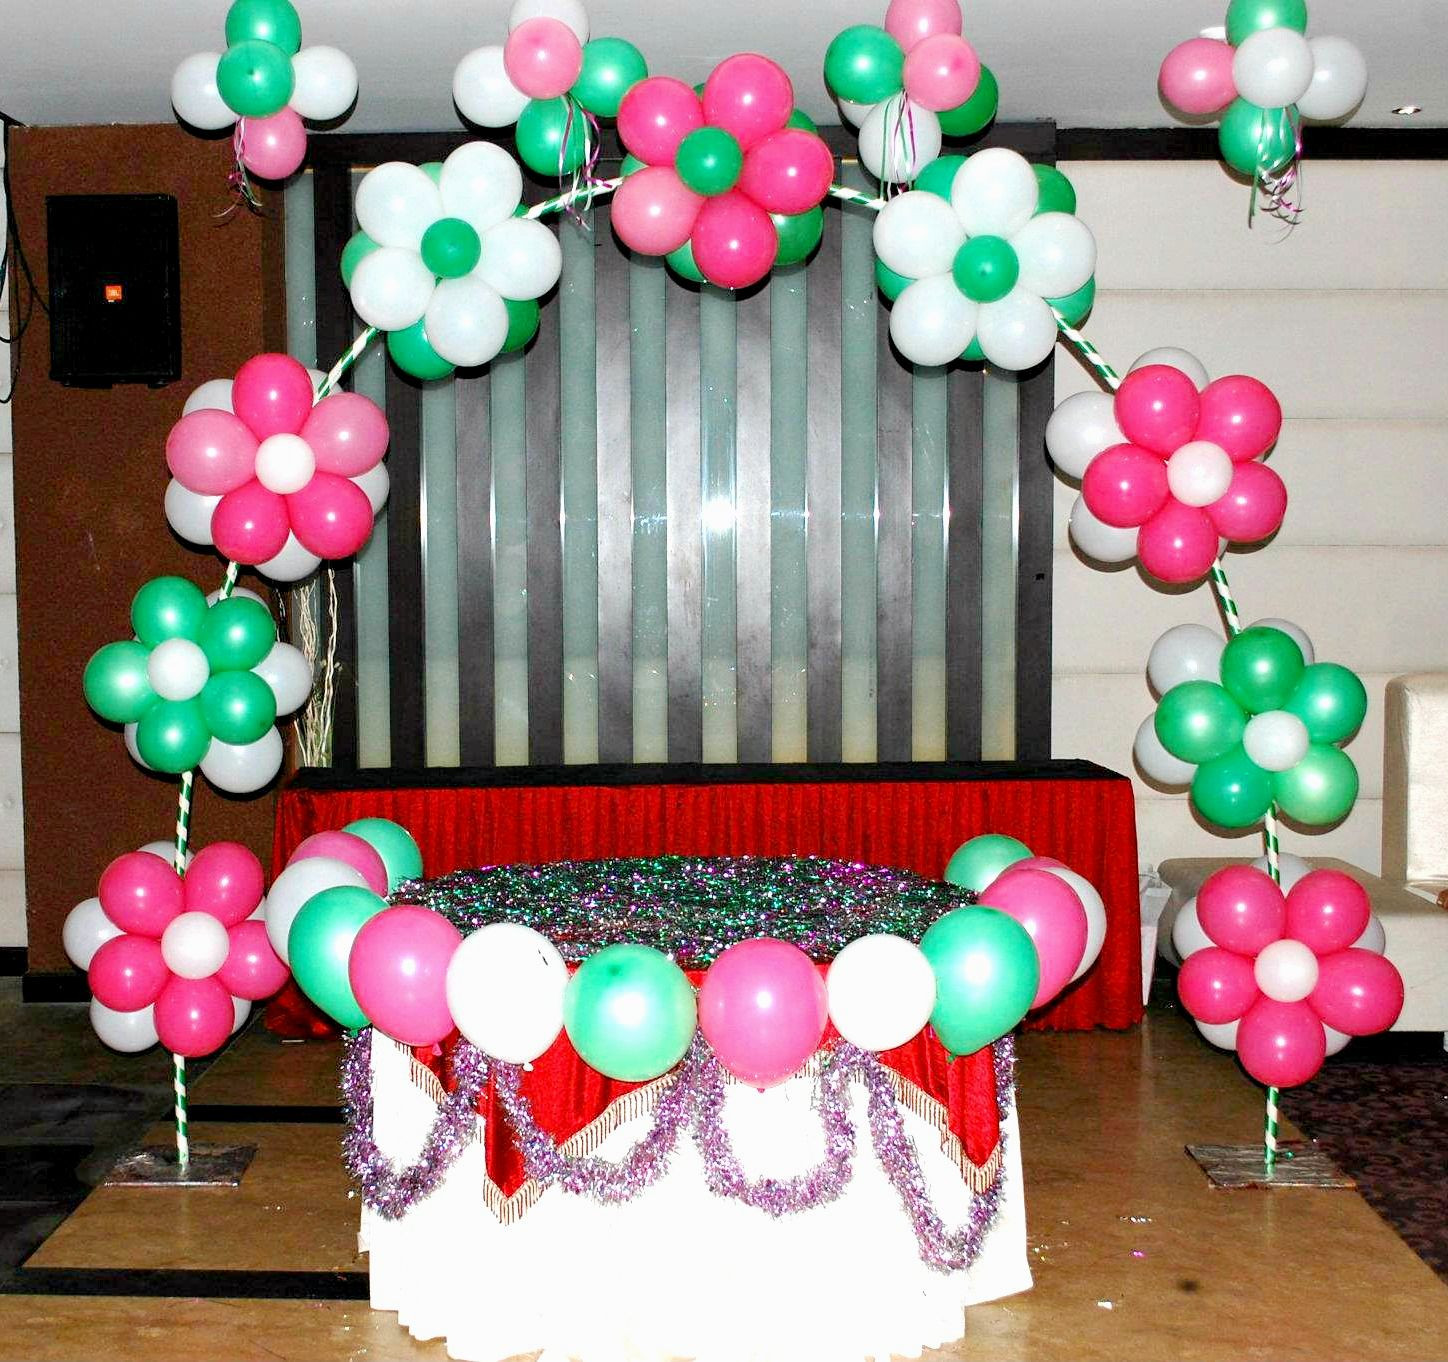 Balloons Decoration For Birthday Party
 8 Latest And Trending Balloon Decorations For A Home